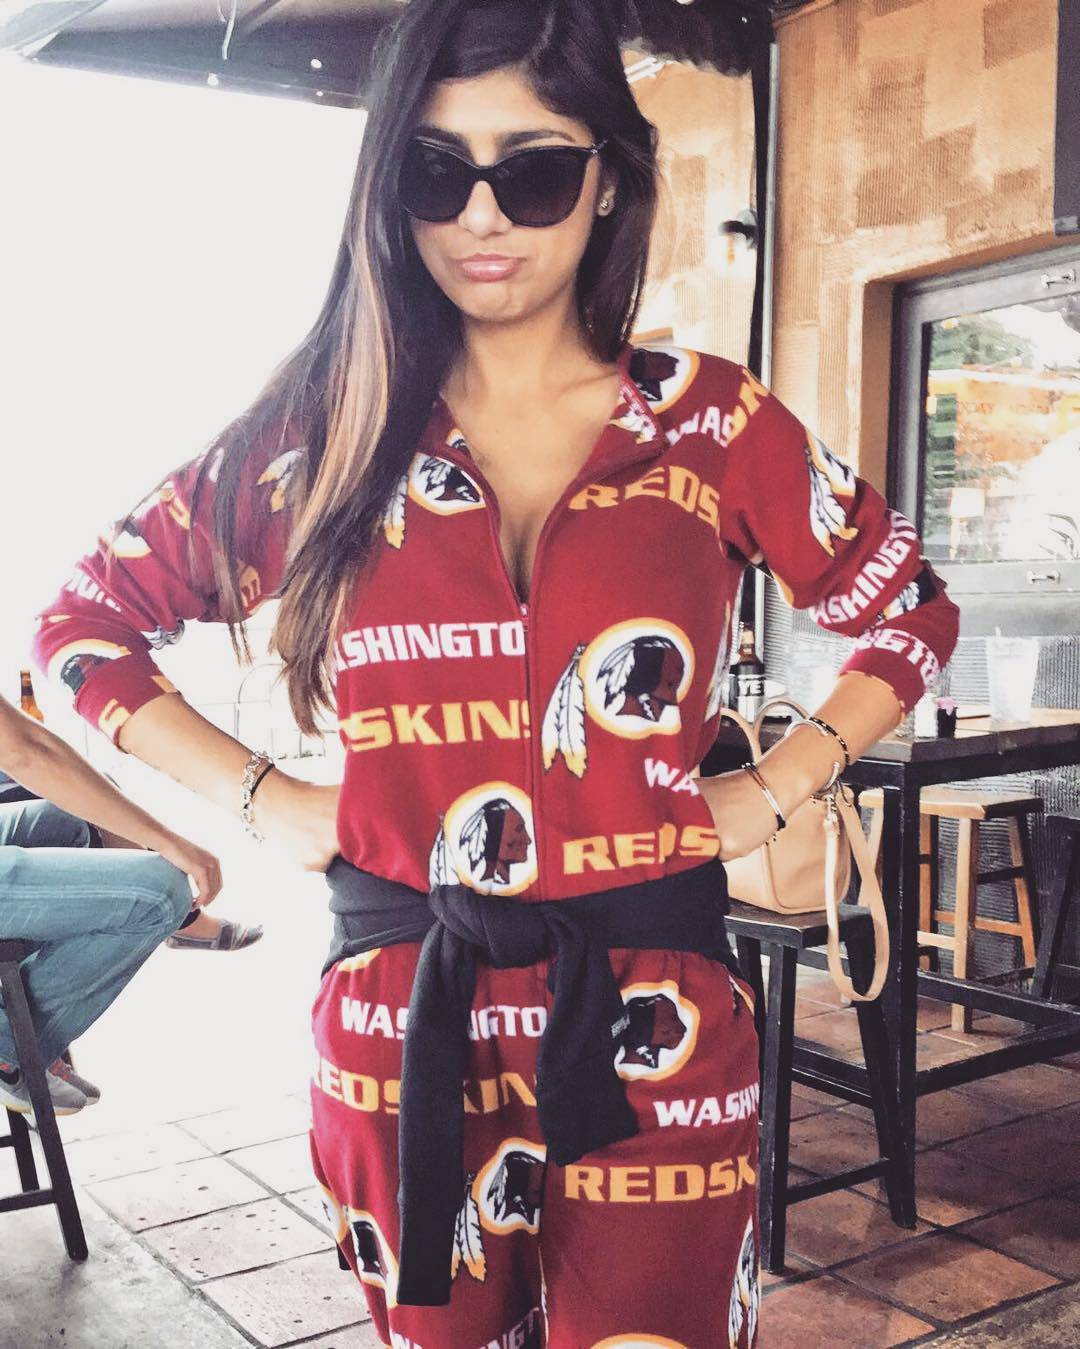 Video Mia Khalifa Redskins 2018 - Porn Star Mia Khalifa Curved Cowboys Fans, but It Backfired in the Most  Epic Way | News | BET